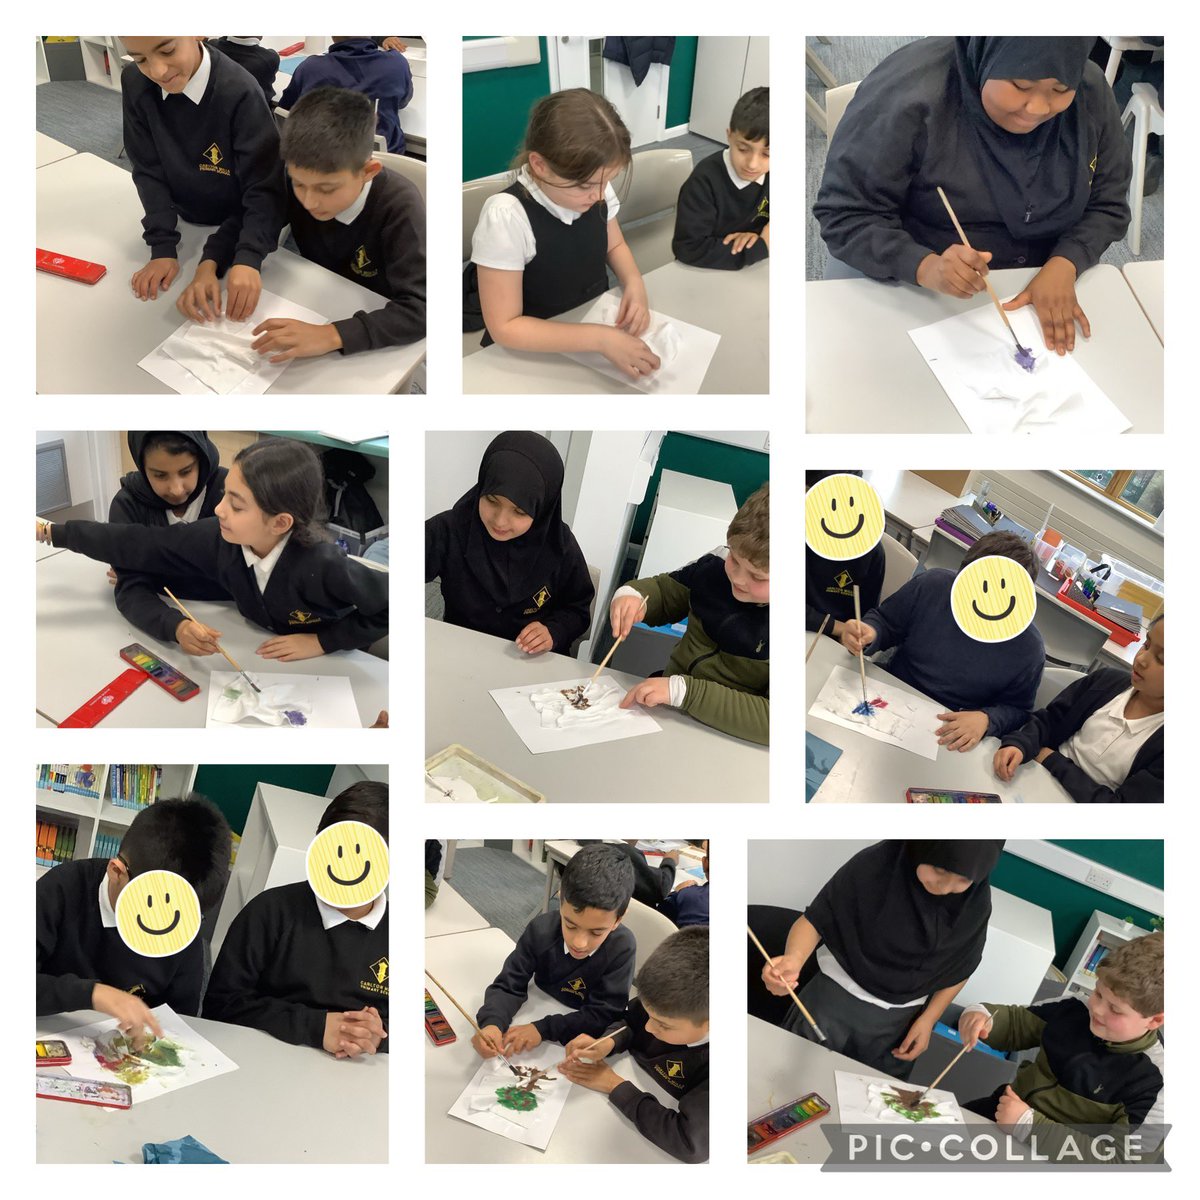 Patras have enjoyed learning about appliqué, using different materials to manipulate their pieces of art. #Creativity #Collaboration #Confidence #ExcellenceForAll #CUSPCurriculum